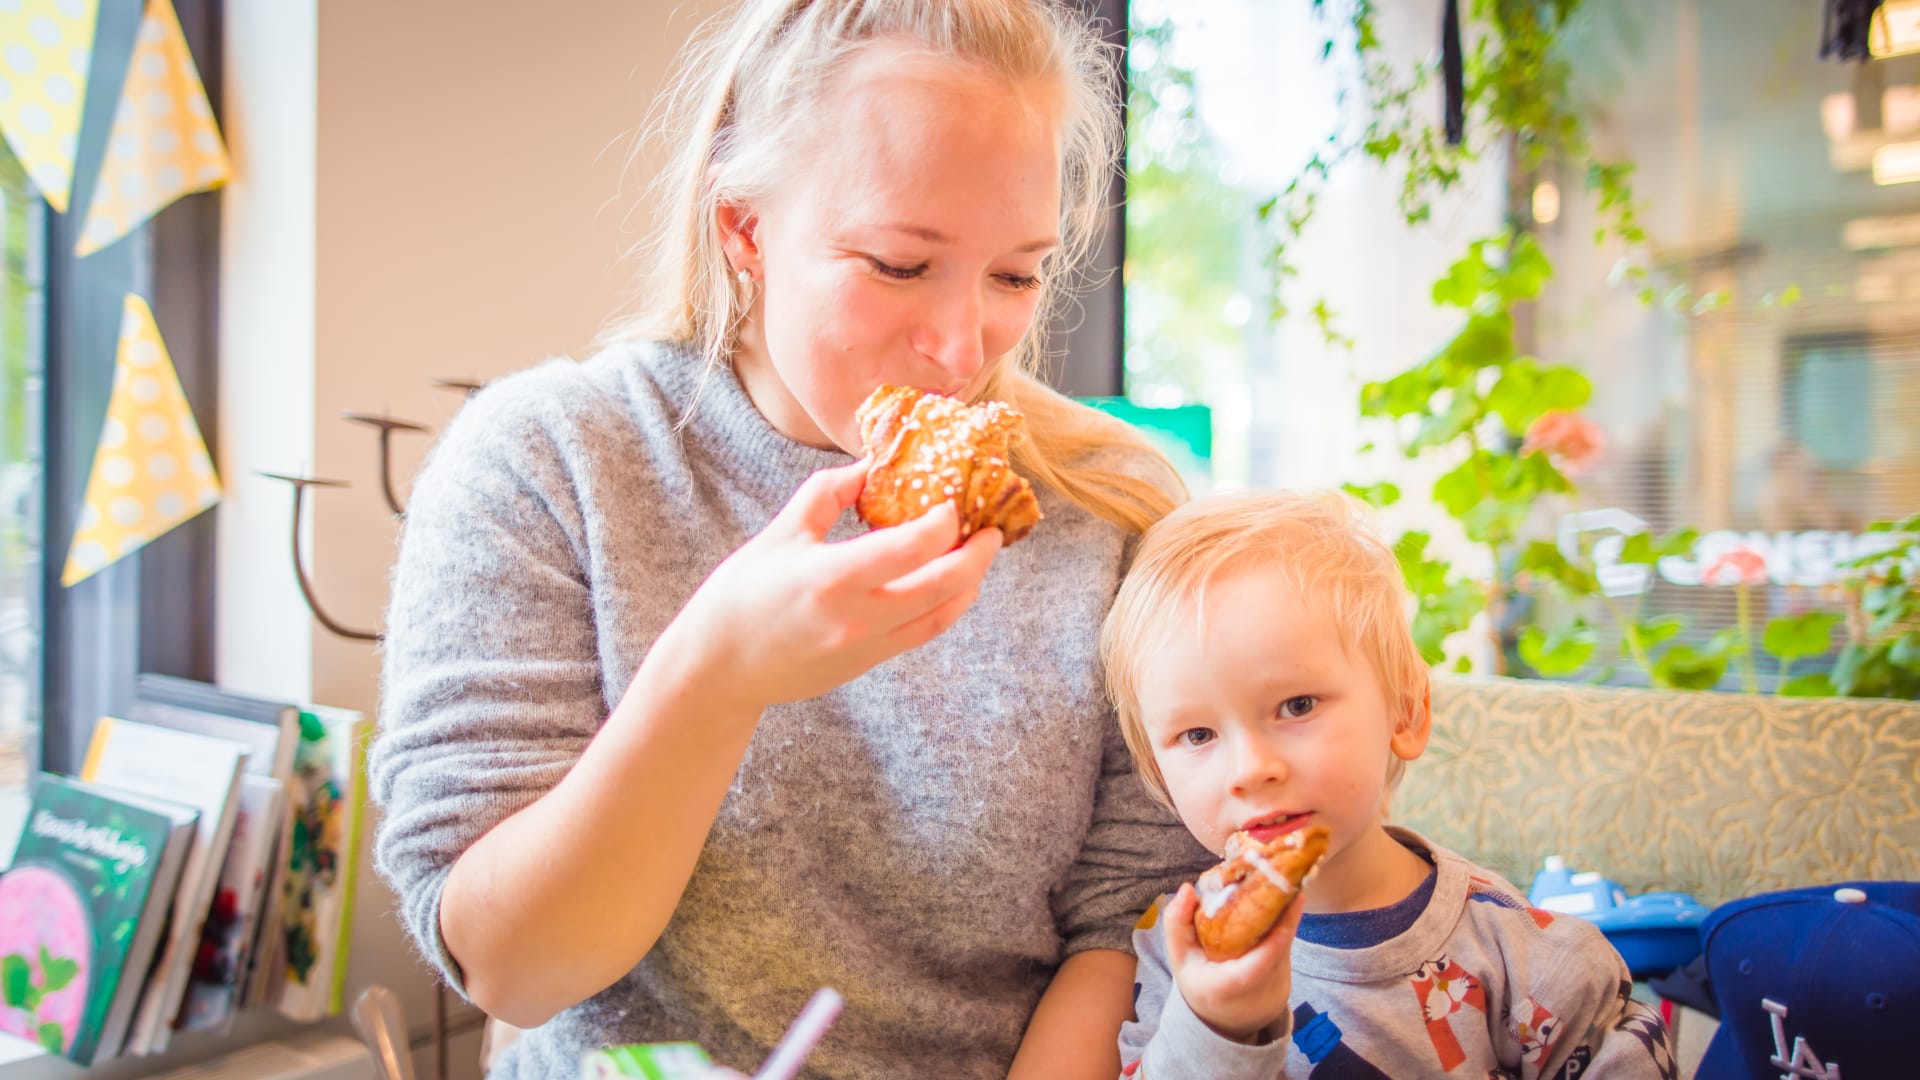 A woman and a child enjoying delicious Finnish cinnamon buns at Bakery Cafe Puusti, Tampere, Finland